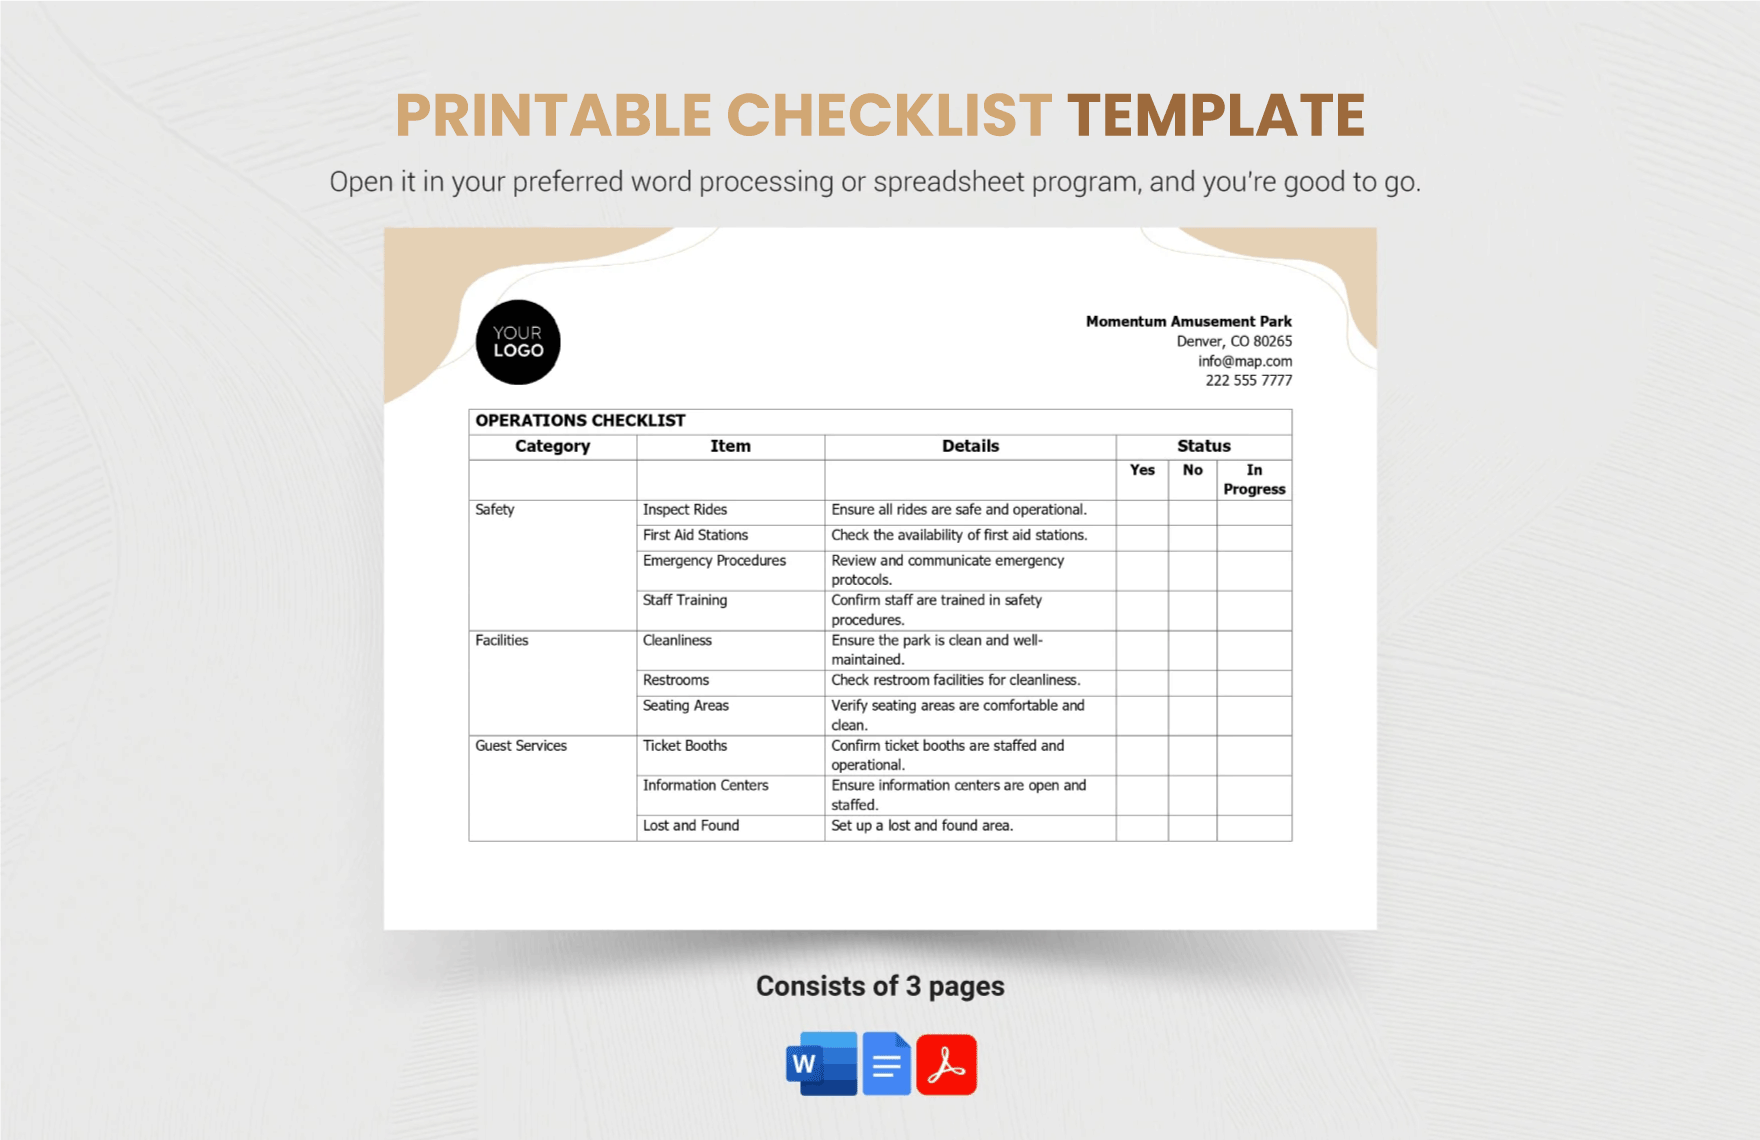 Free Printable Checklist Template in Word, Google Docs, PDF